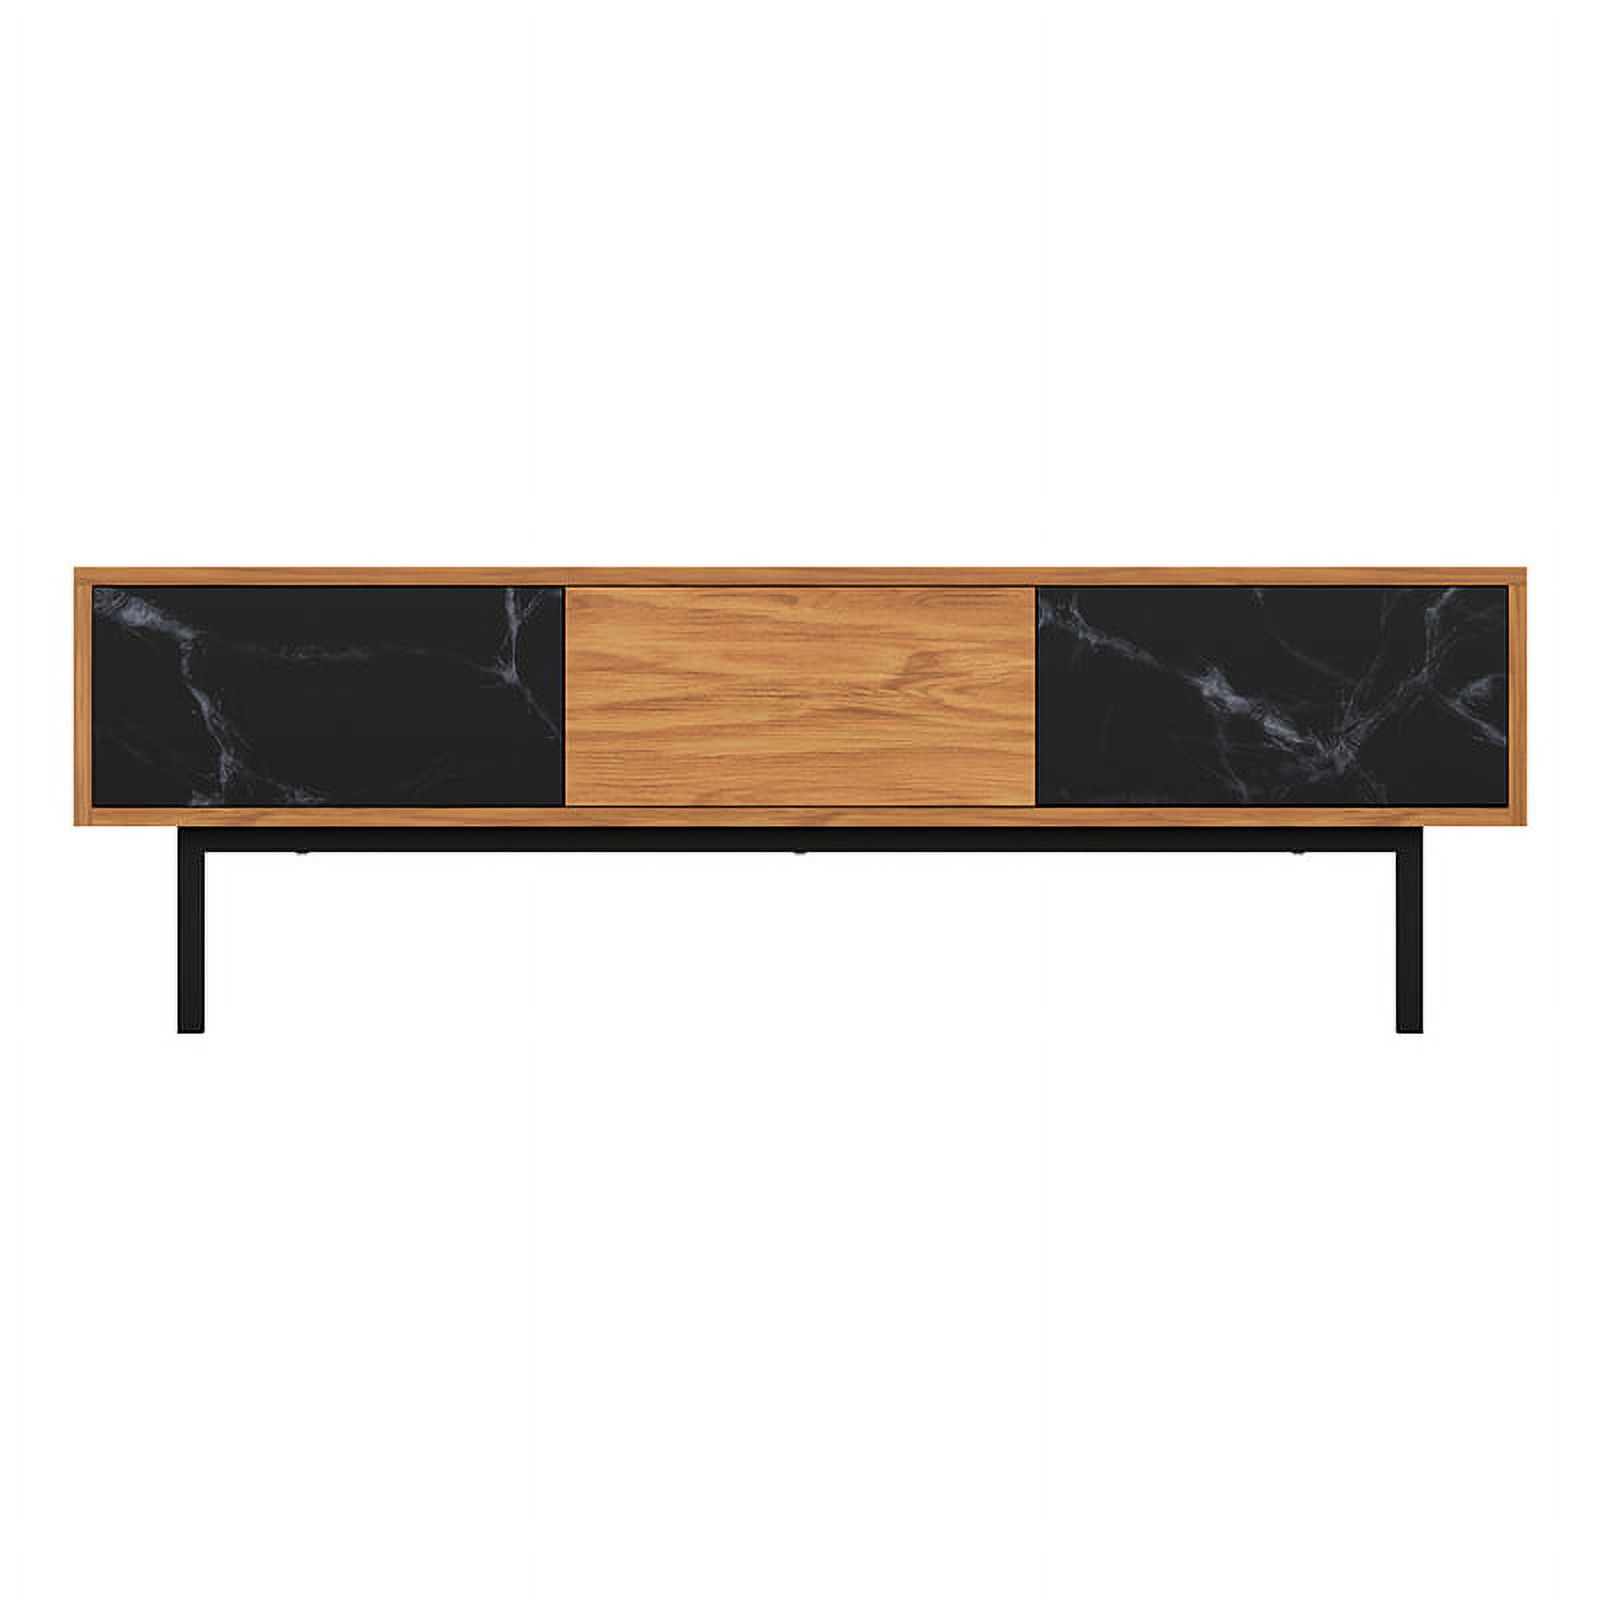 FS1400SKYW-A Skyline TV Stand for TVs 32”, 37”, 39”, 40”, 42”, 46”, 47”, 50”, 52”, 55”, 58”, 60”, 65”, Walnut Finish, plus Black Marble-Effect Doors, Includes Cable Management. - image 2 of 3